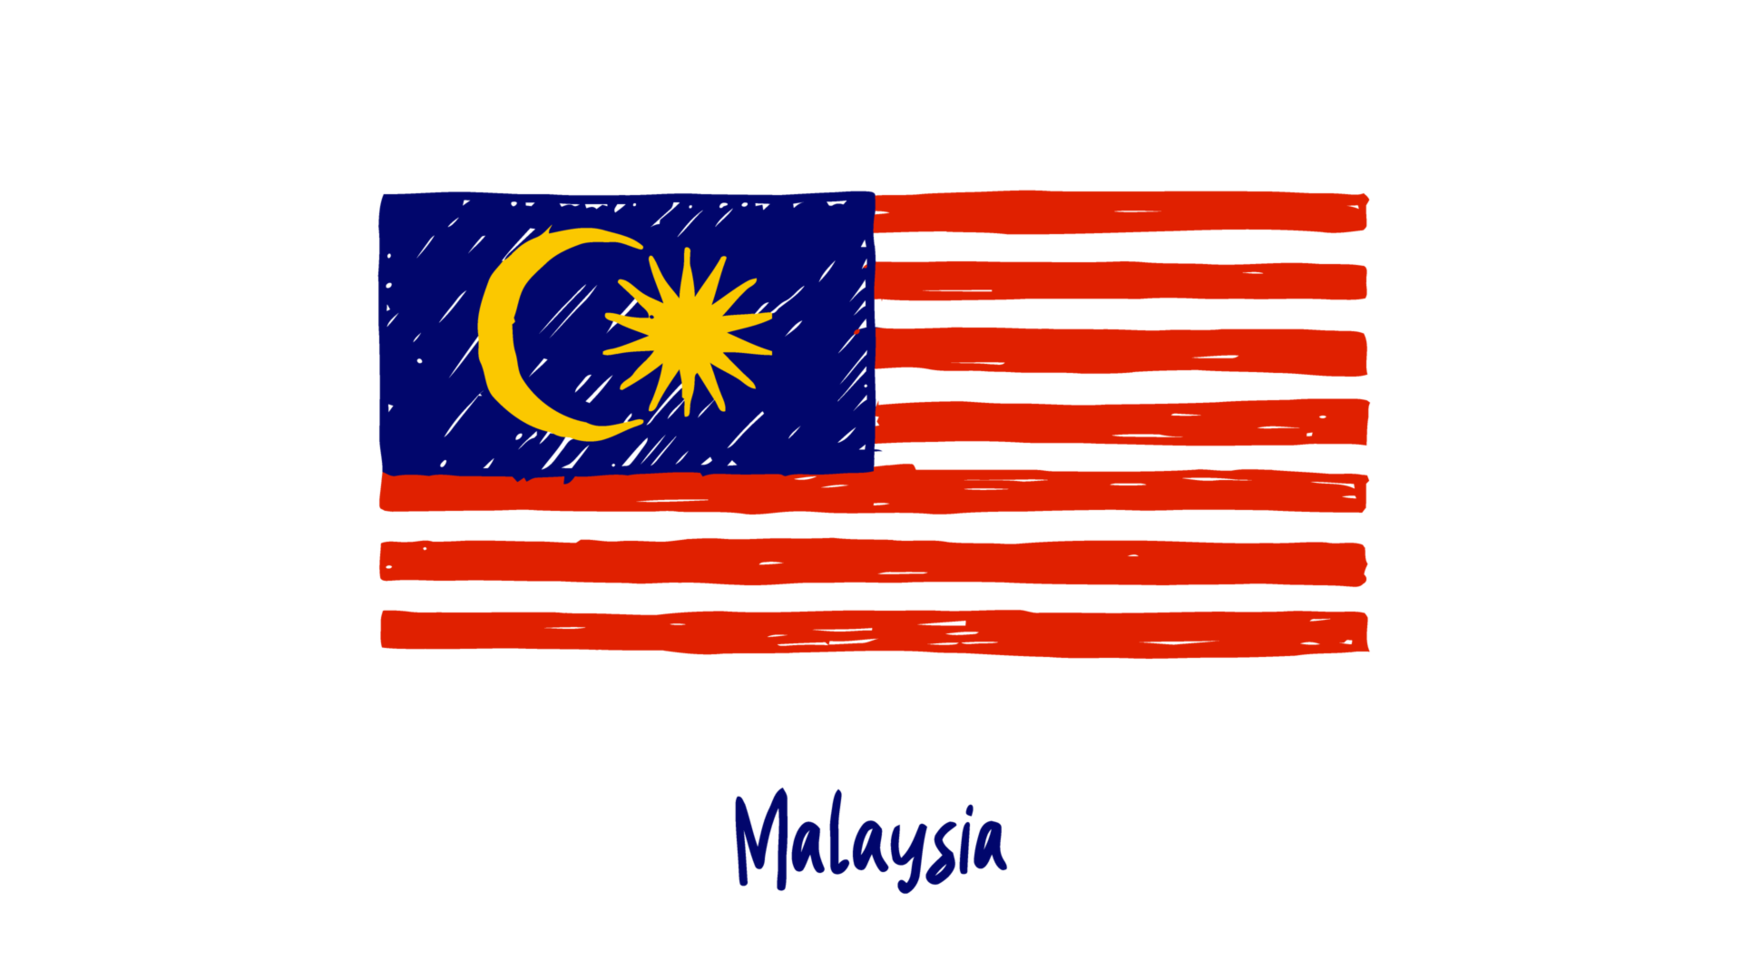 Malaysia National Country Flag Pencil Color Sketch Illustration with Transparent Background png